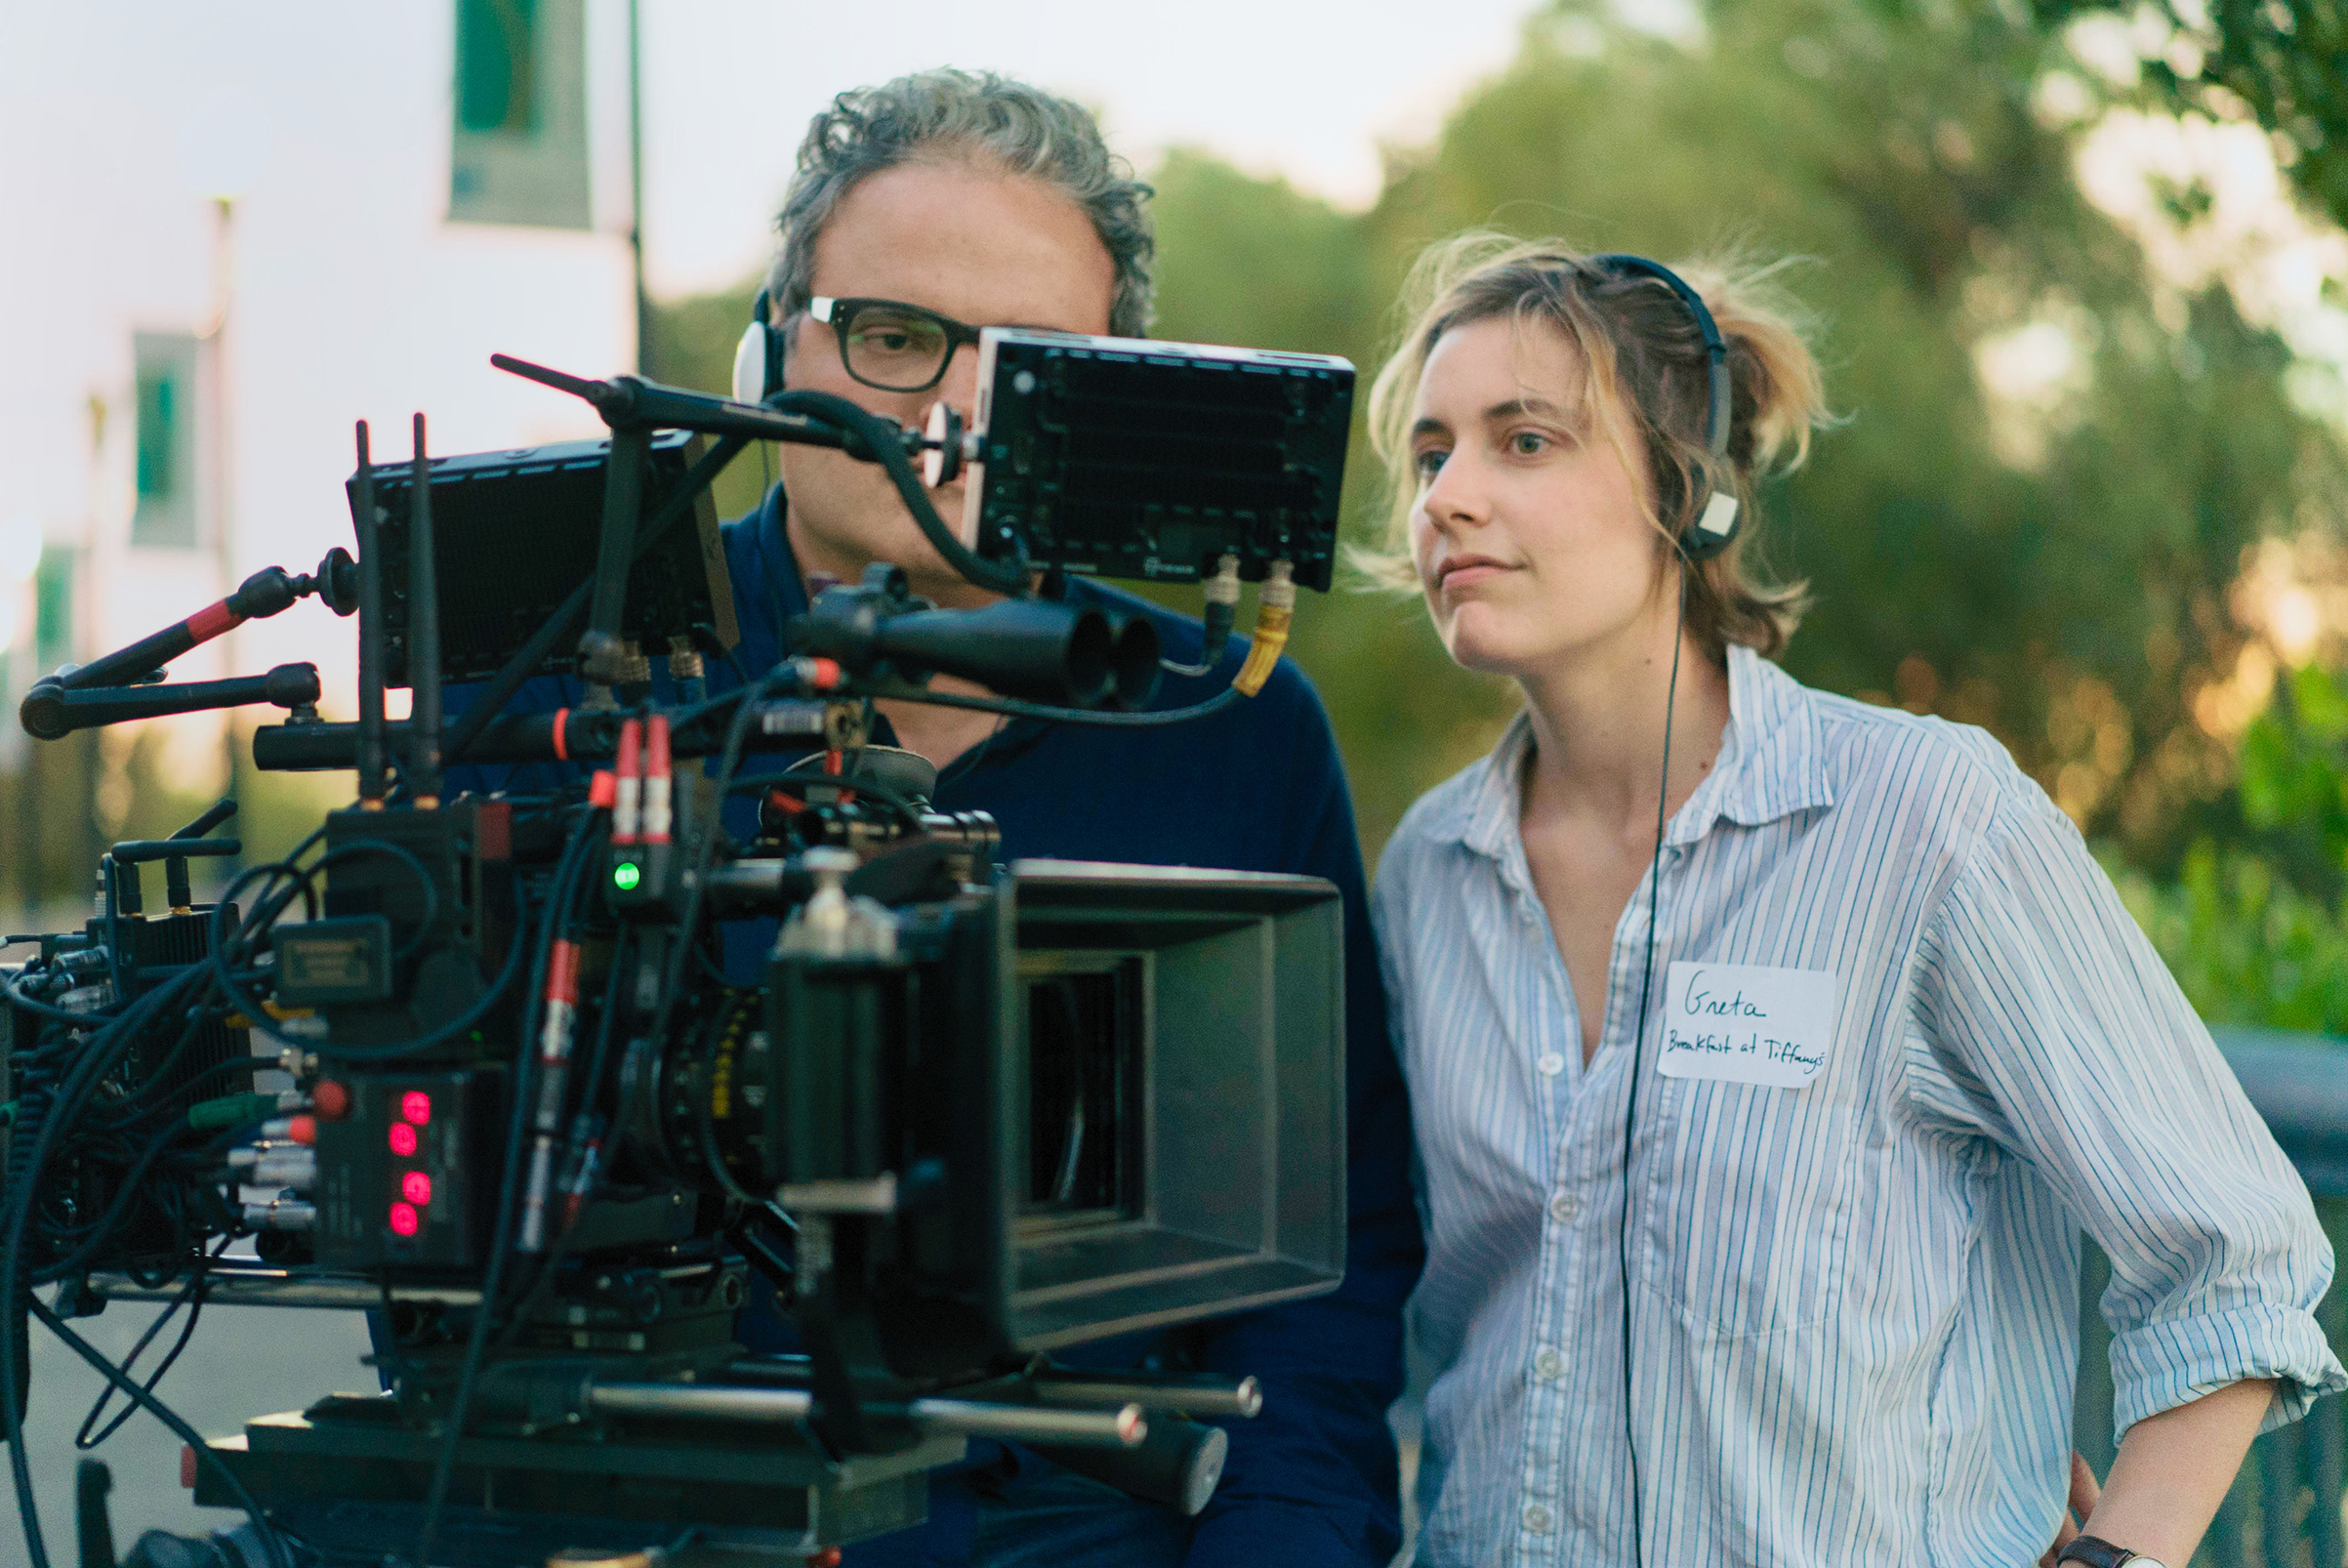 Gerwig had the cast and crew of Lady Bird wear name tags to create a warm atmosphere on set (A24)